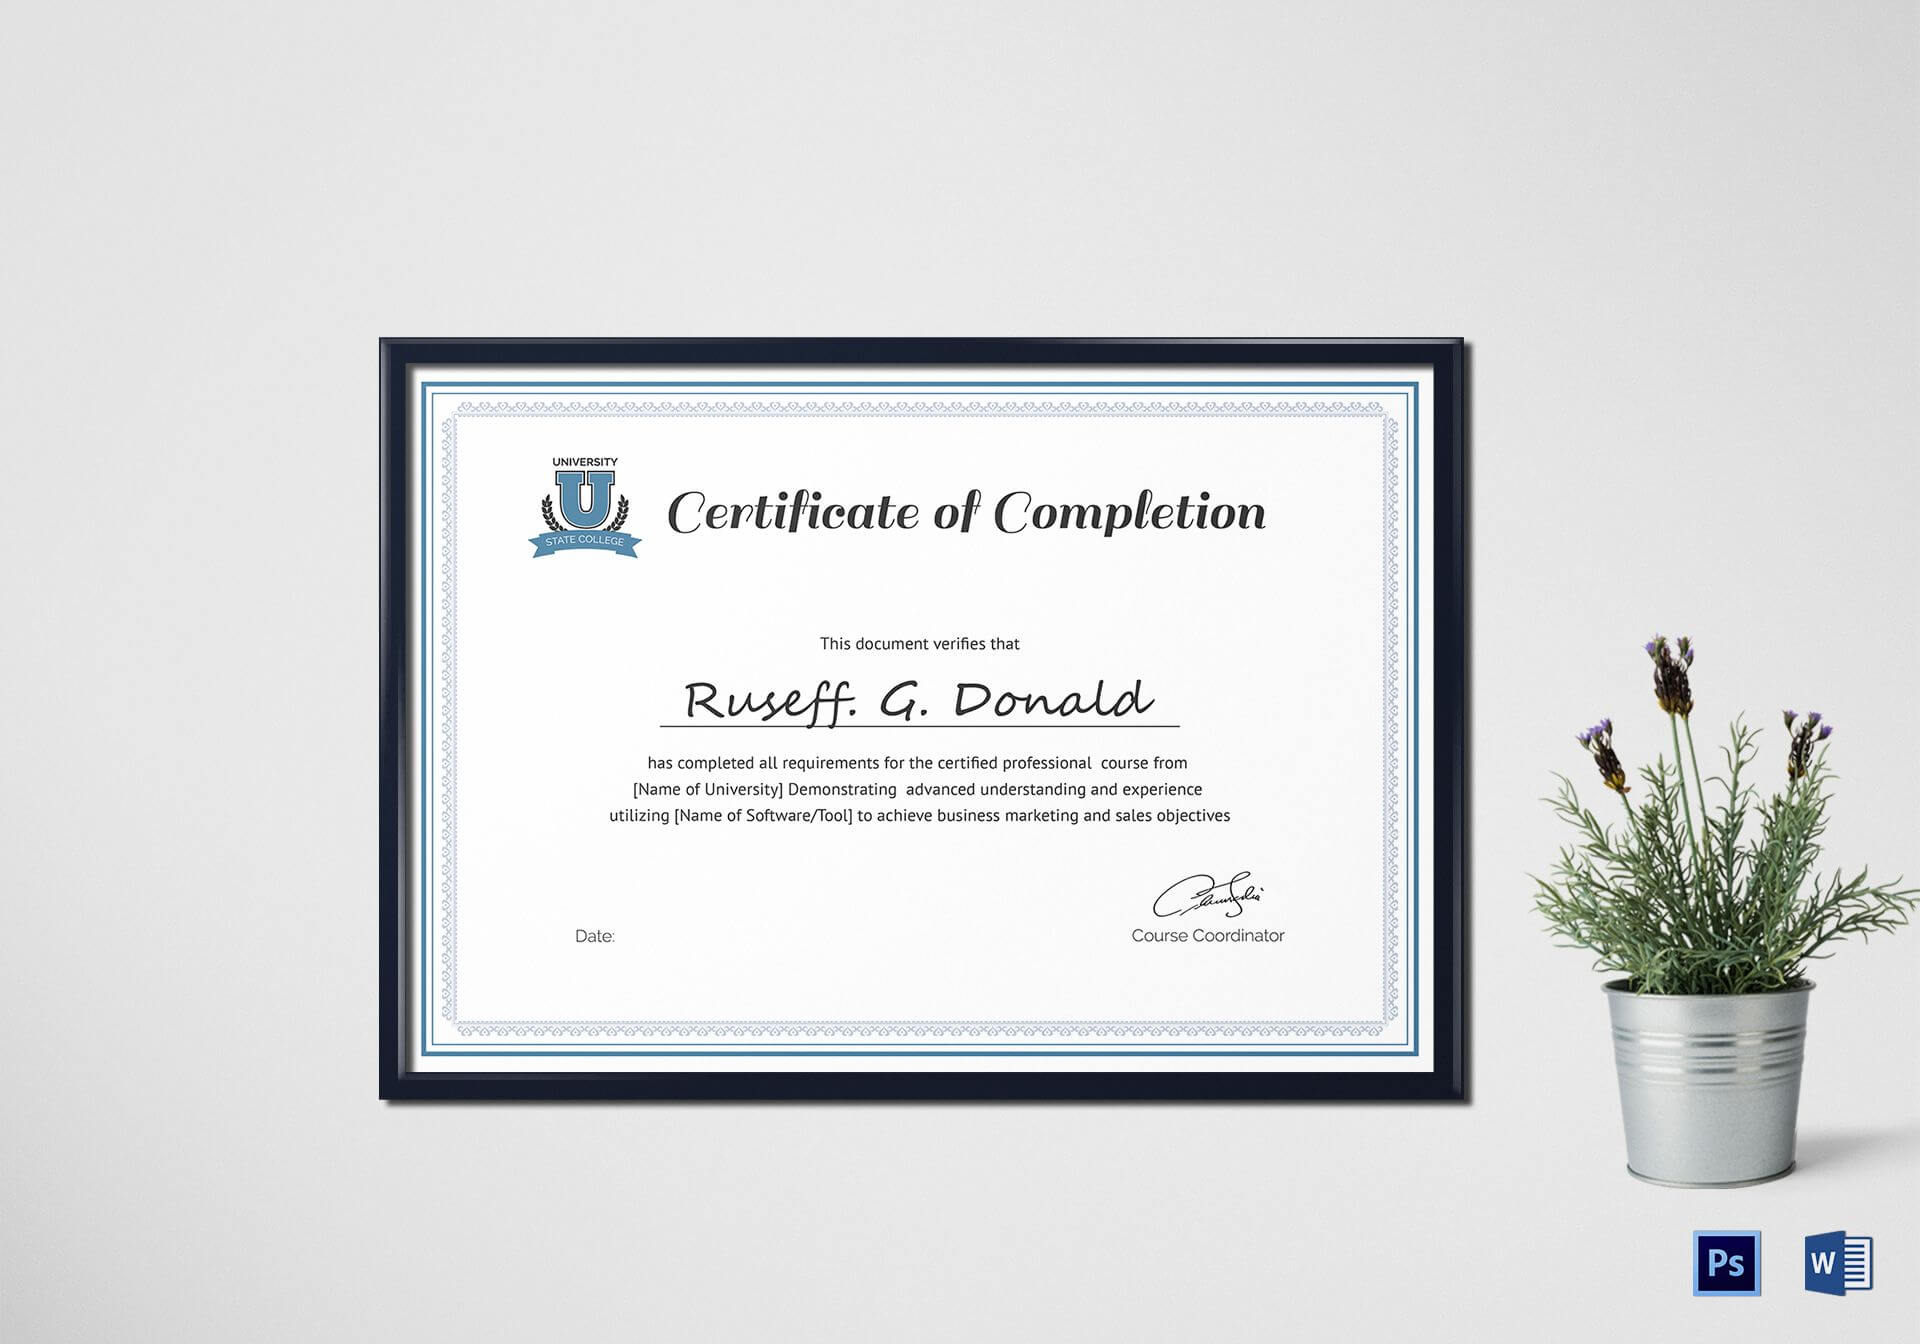 Professional Course Completion Certificate Template With Certificate Of Completion Word Template